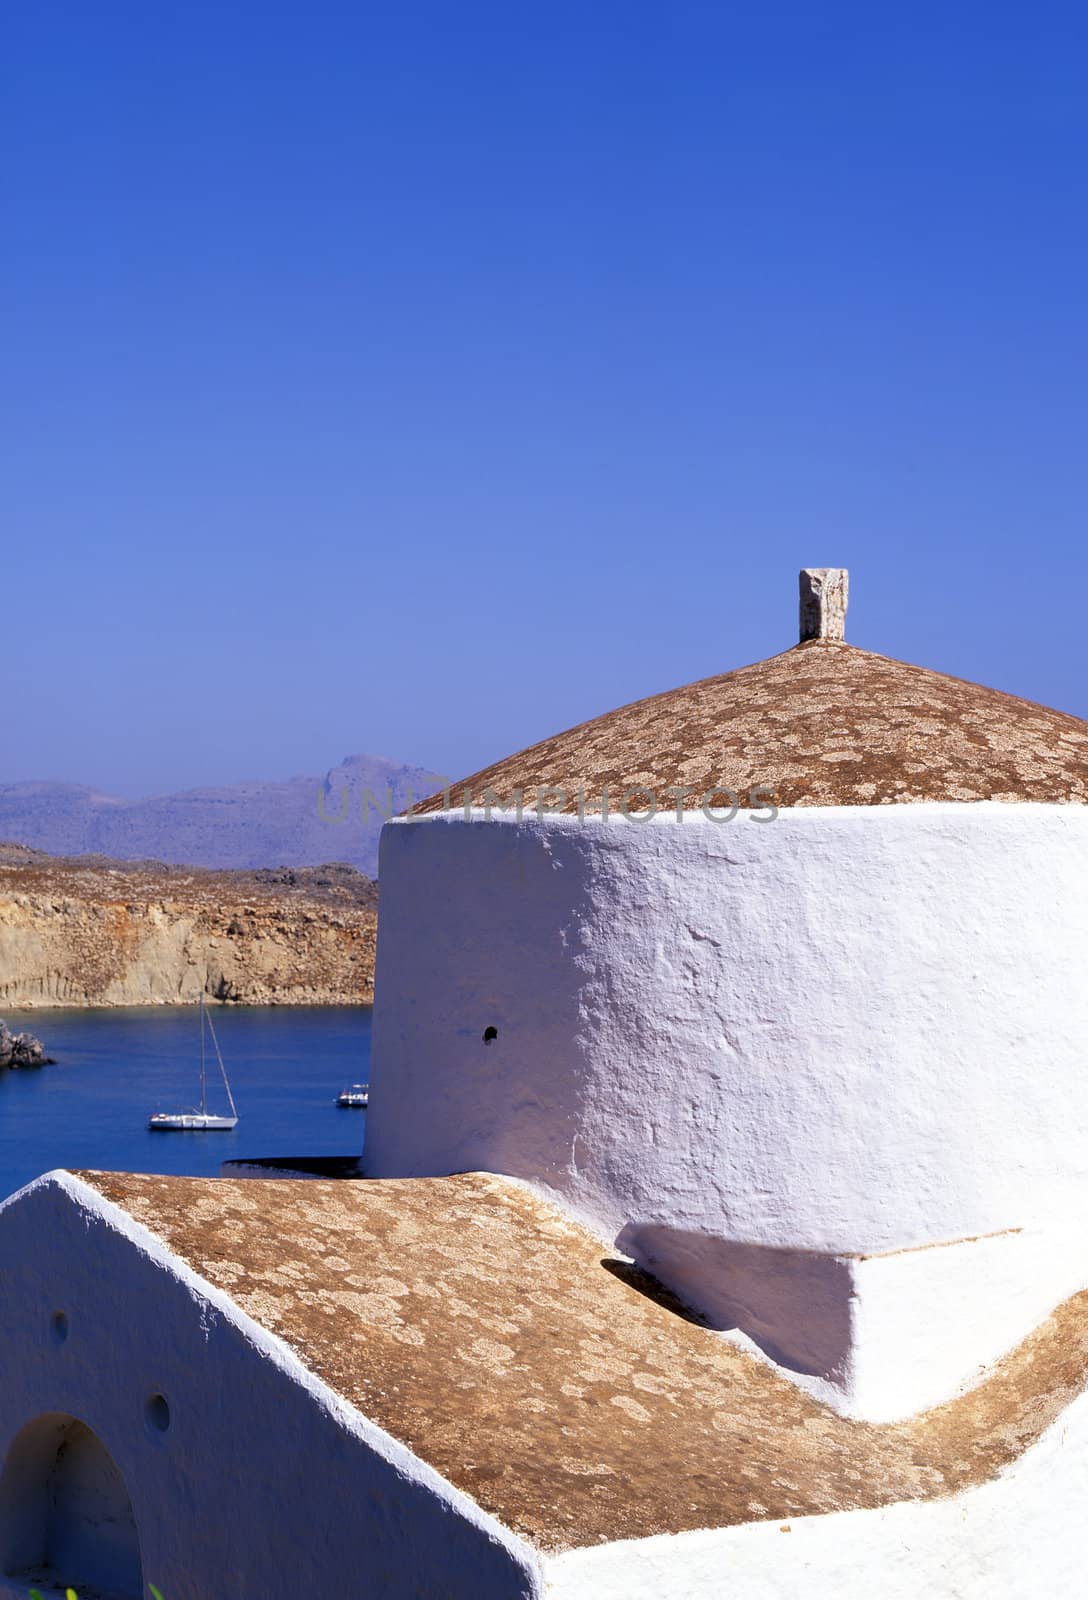 A greek church over looking the bay of Lindos on the island of Rhodes, Greece.